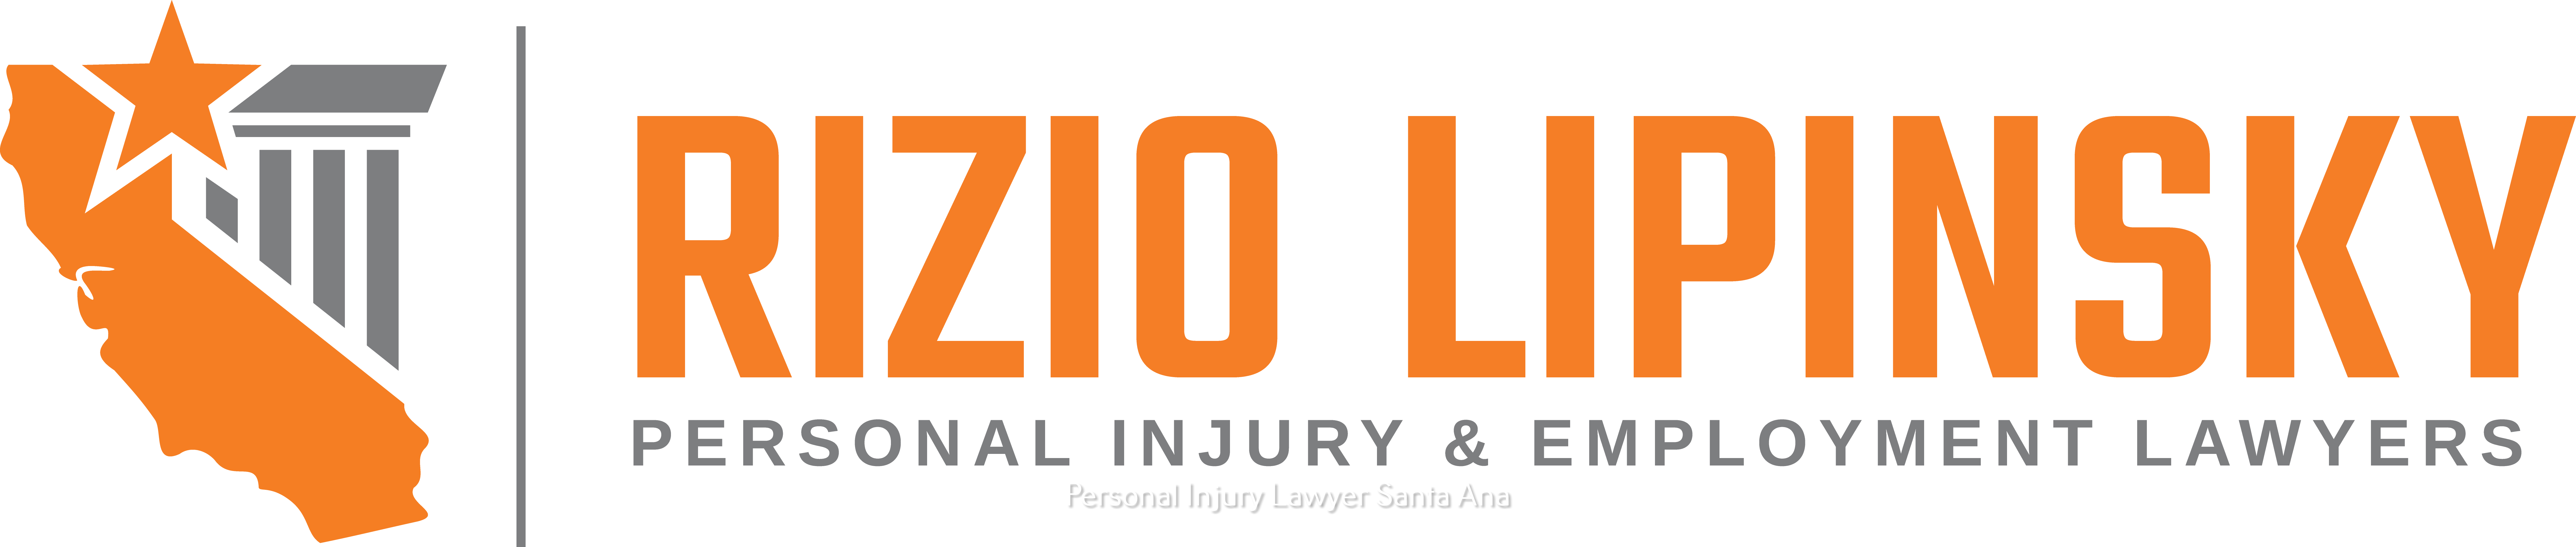 Rizio Lipinsky Law Firm Offers Top-Notch Personal Injury Legal Services In Santa Ana, CA.